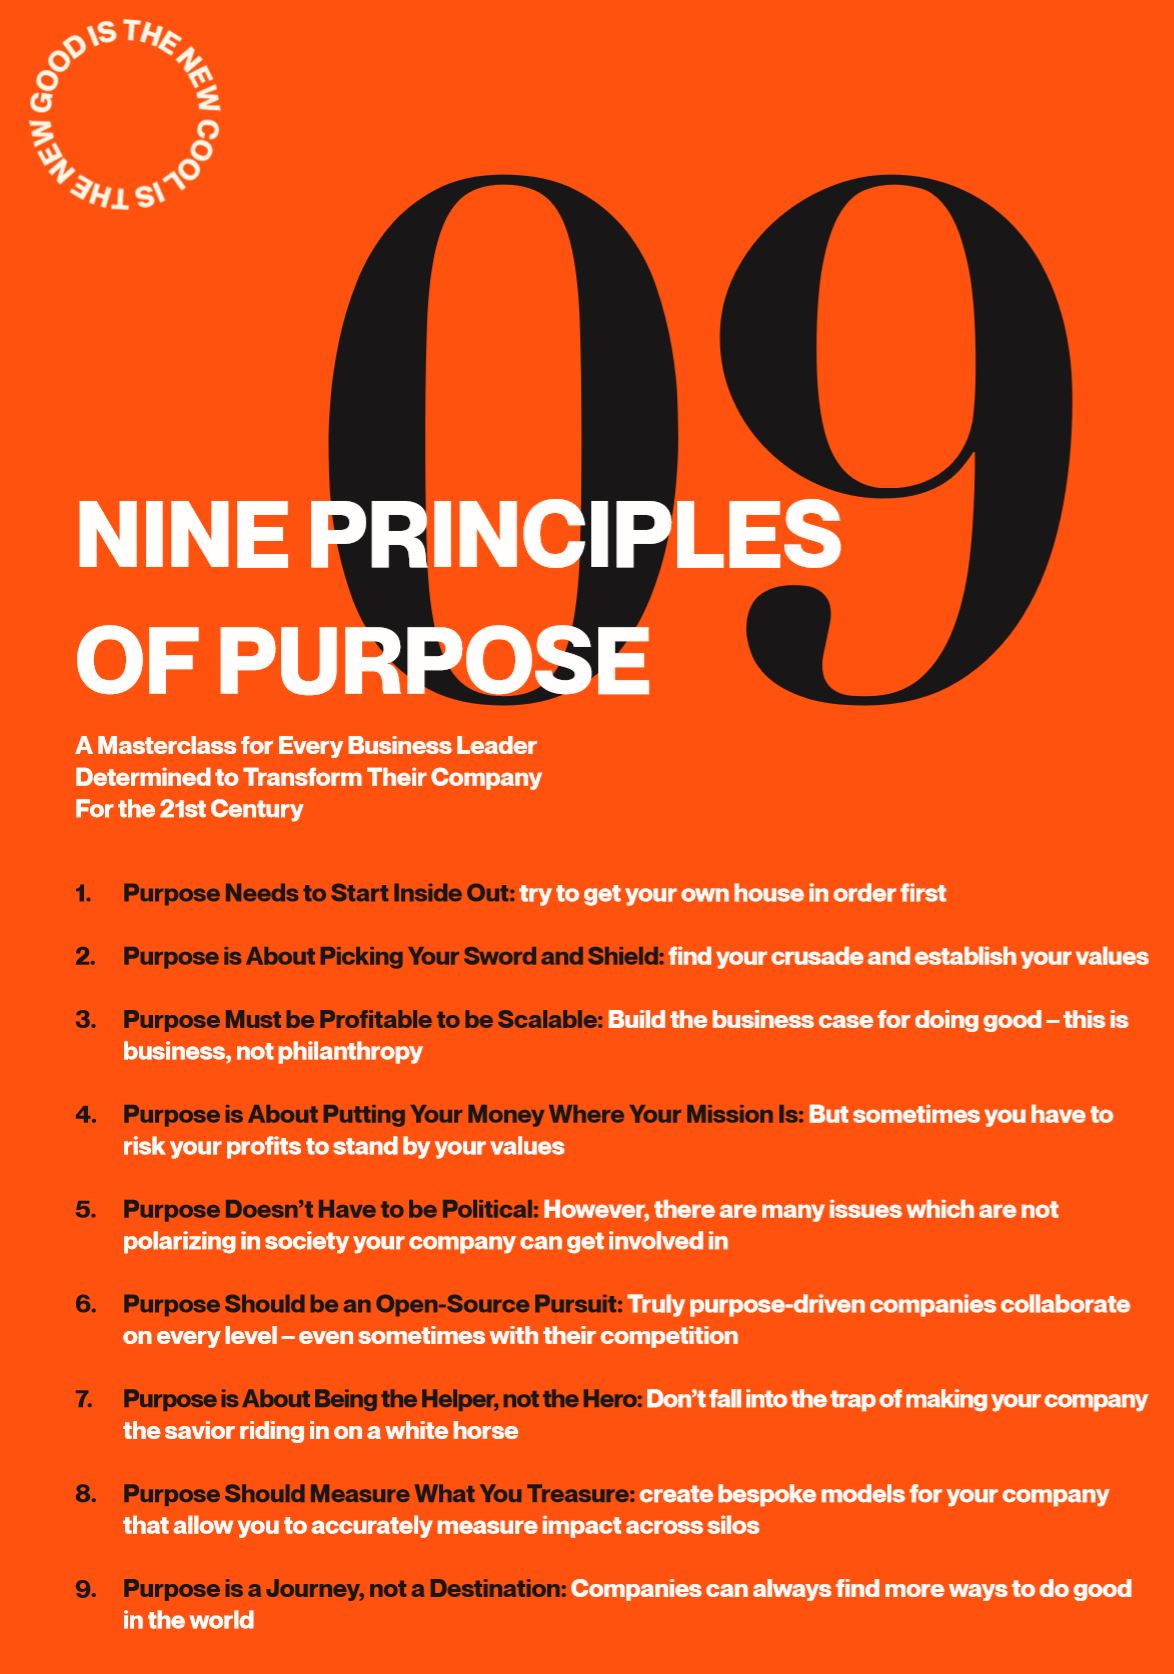 Nine Principles of Purpose from new book Good is The New Cool